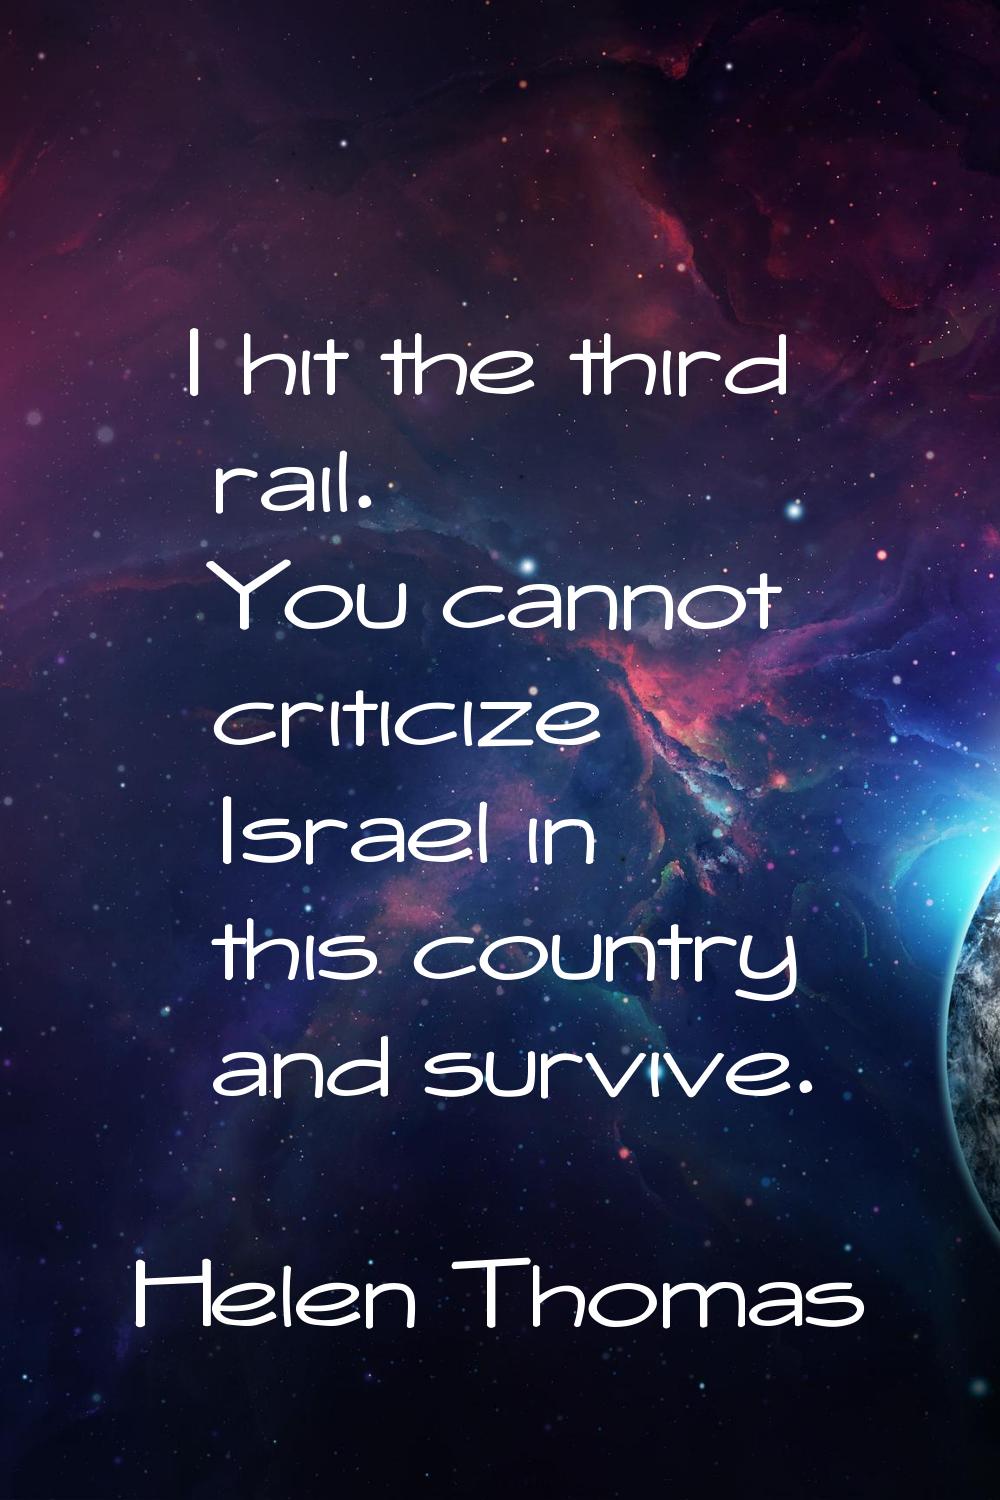 I hit the third rail. You cannot criticize Israel in this country and survive.